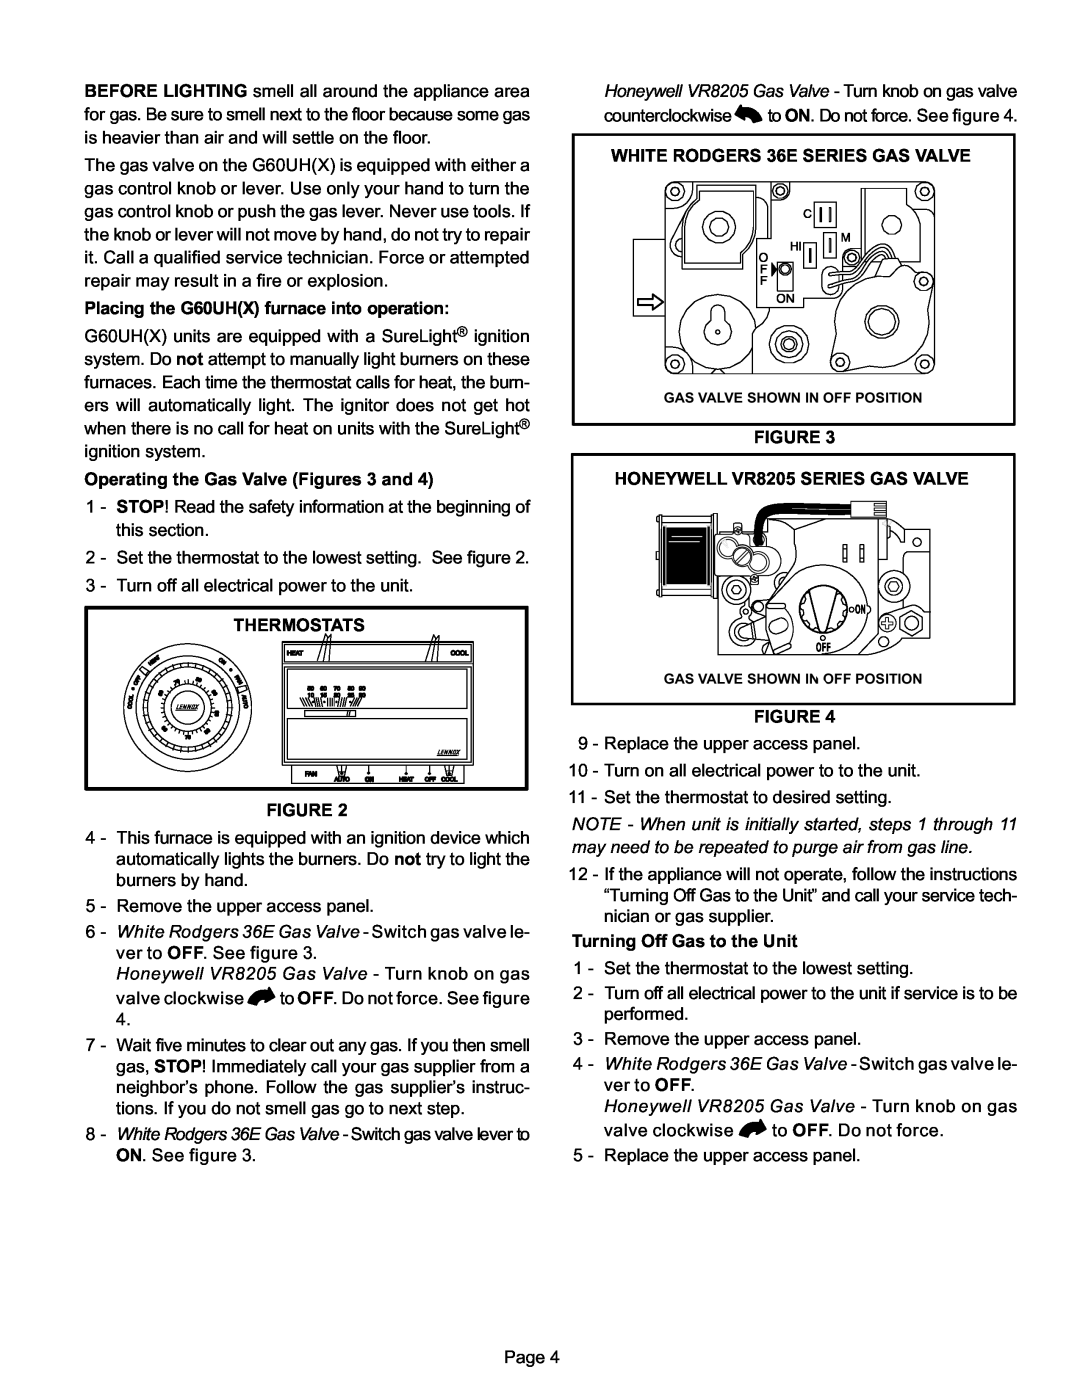 Lennox International Inc G60UH(X) Series manual Operating the Gas Valve Figures 3 and 